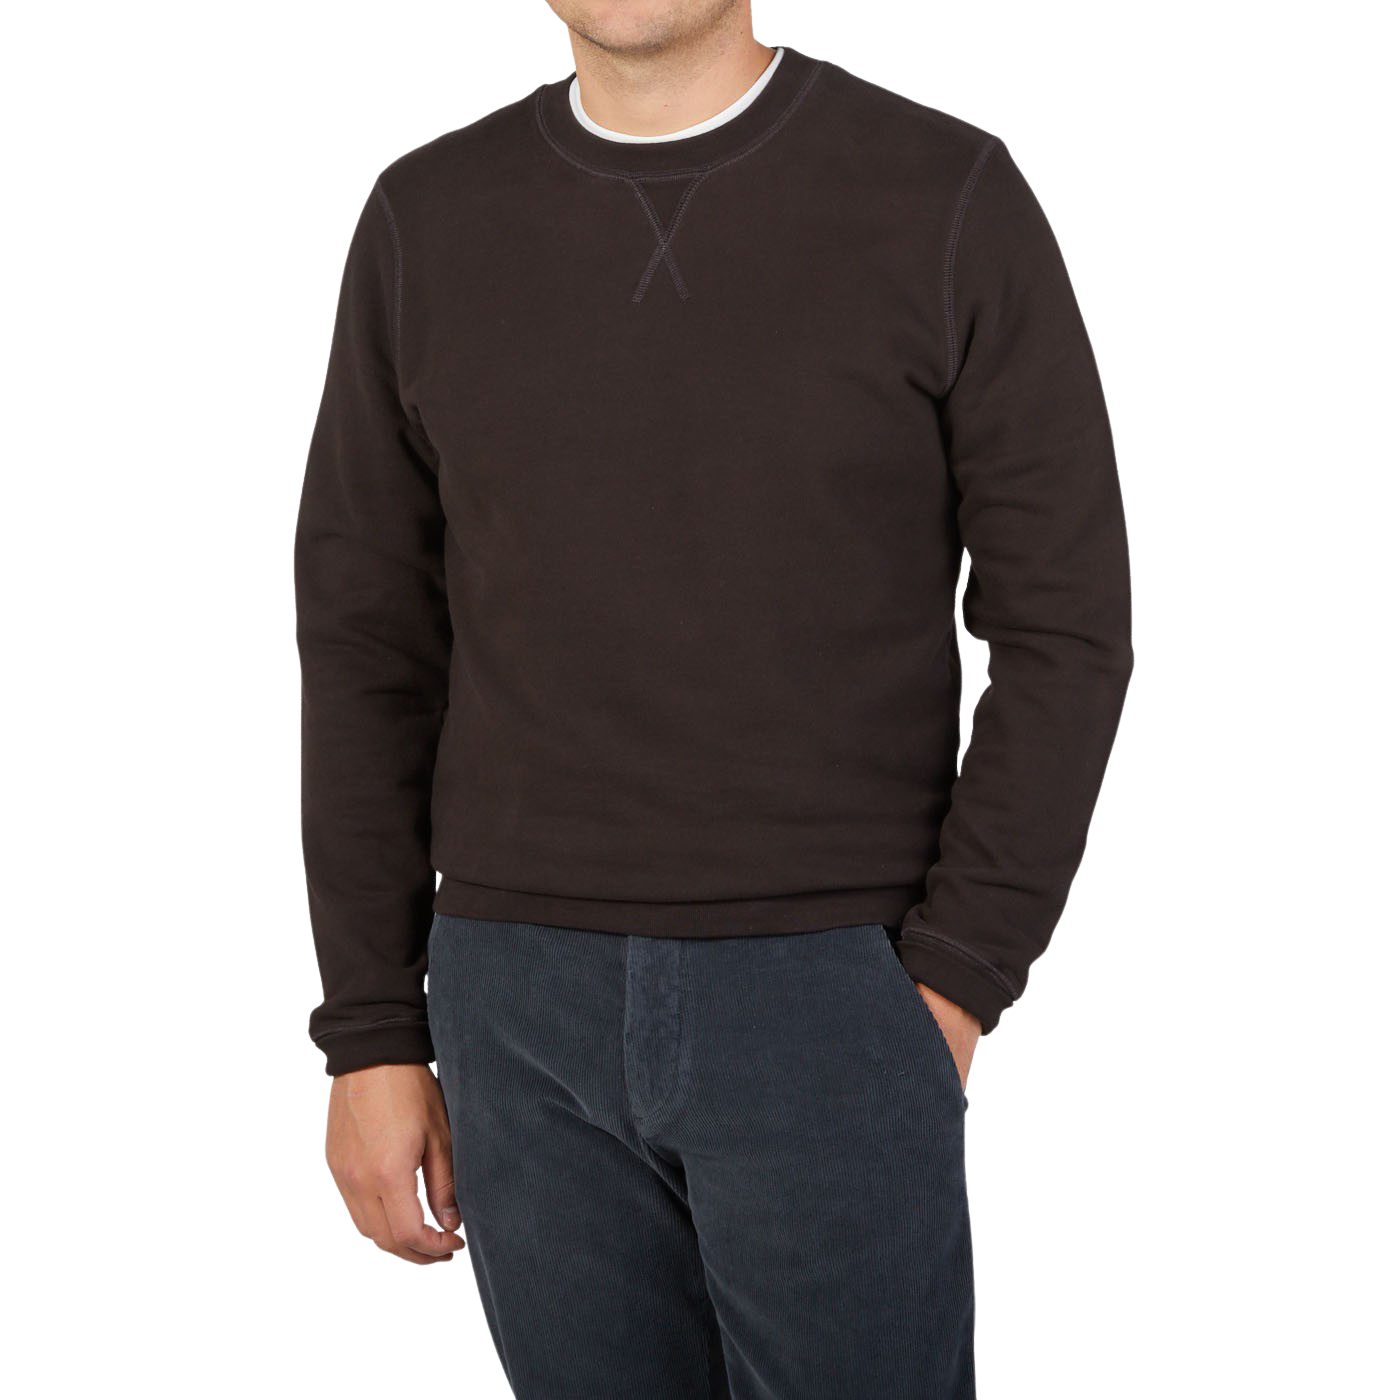 Sunspel Coffee Brown Cotton Loopback Sweater Front